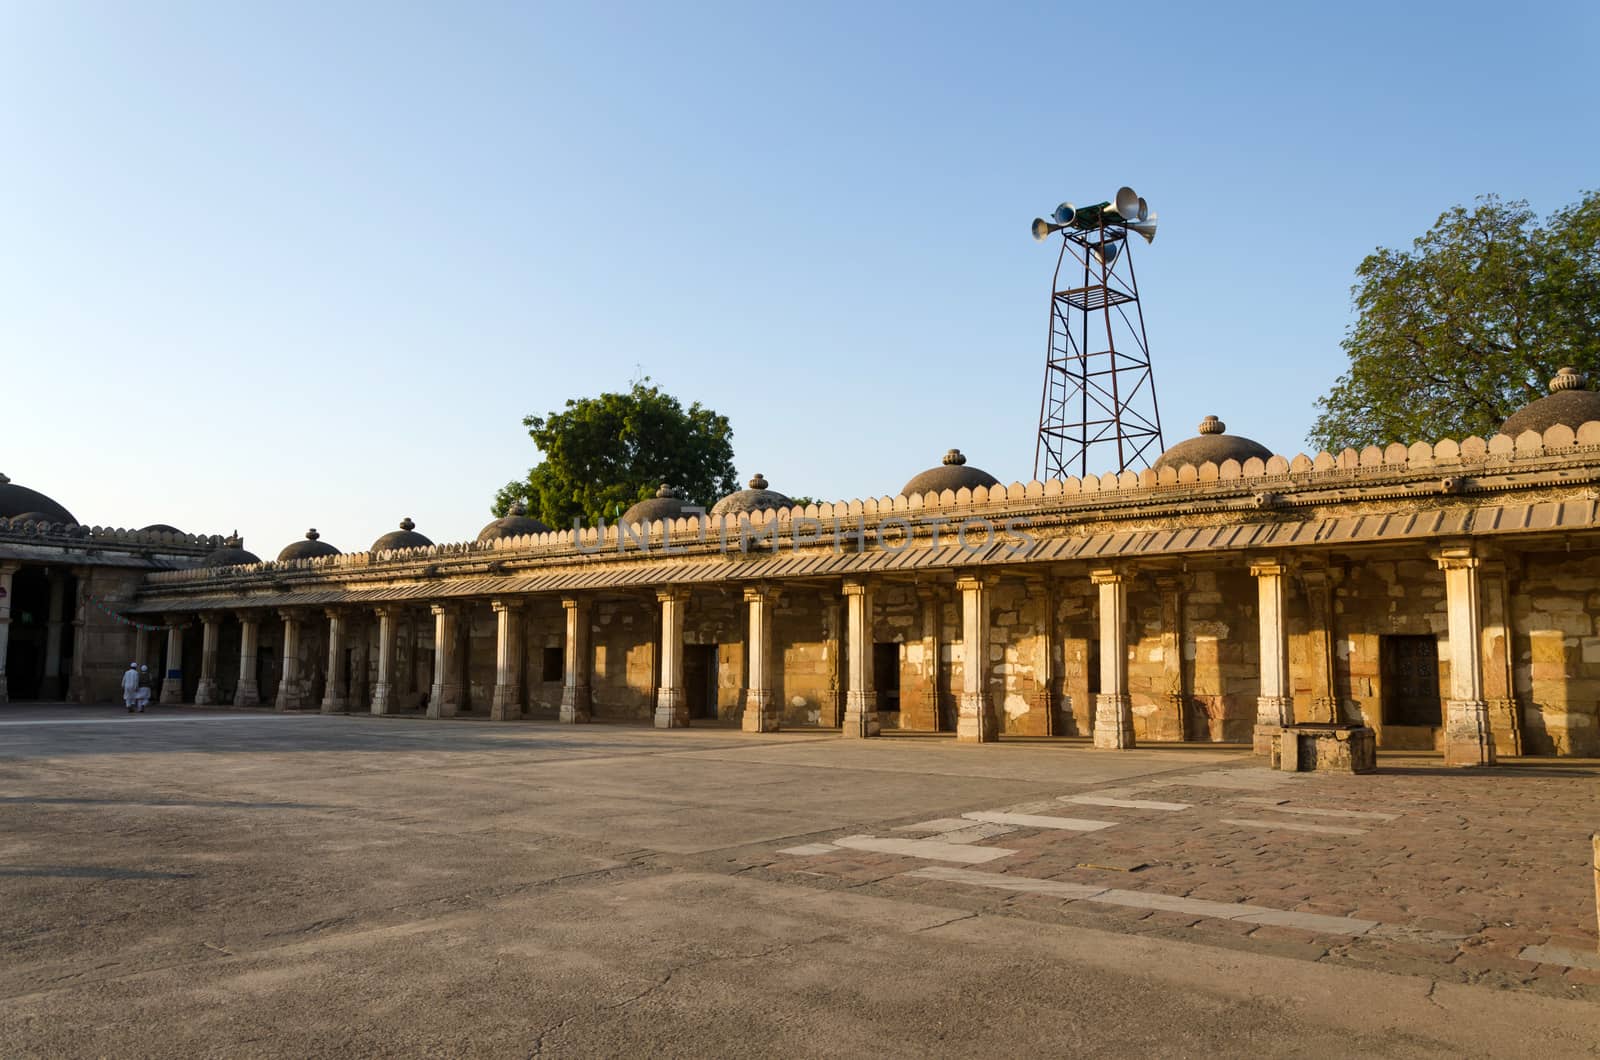 Colonnaded cloister of historic Tomb of Mehmud Begada, Sultan of Gujarat at Sarkhej Roza mosque in Ahmedabad, India